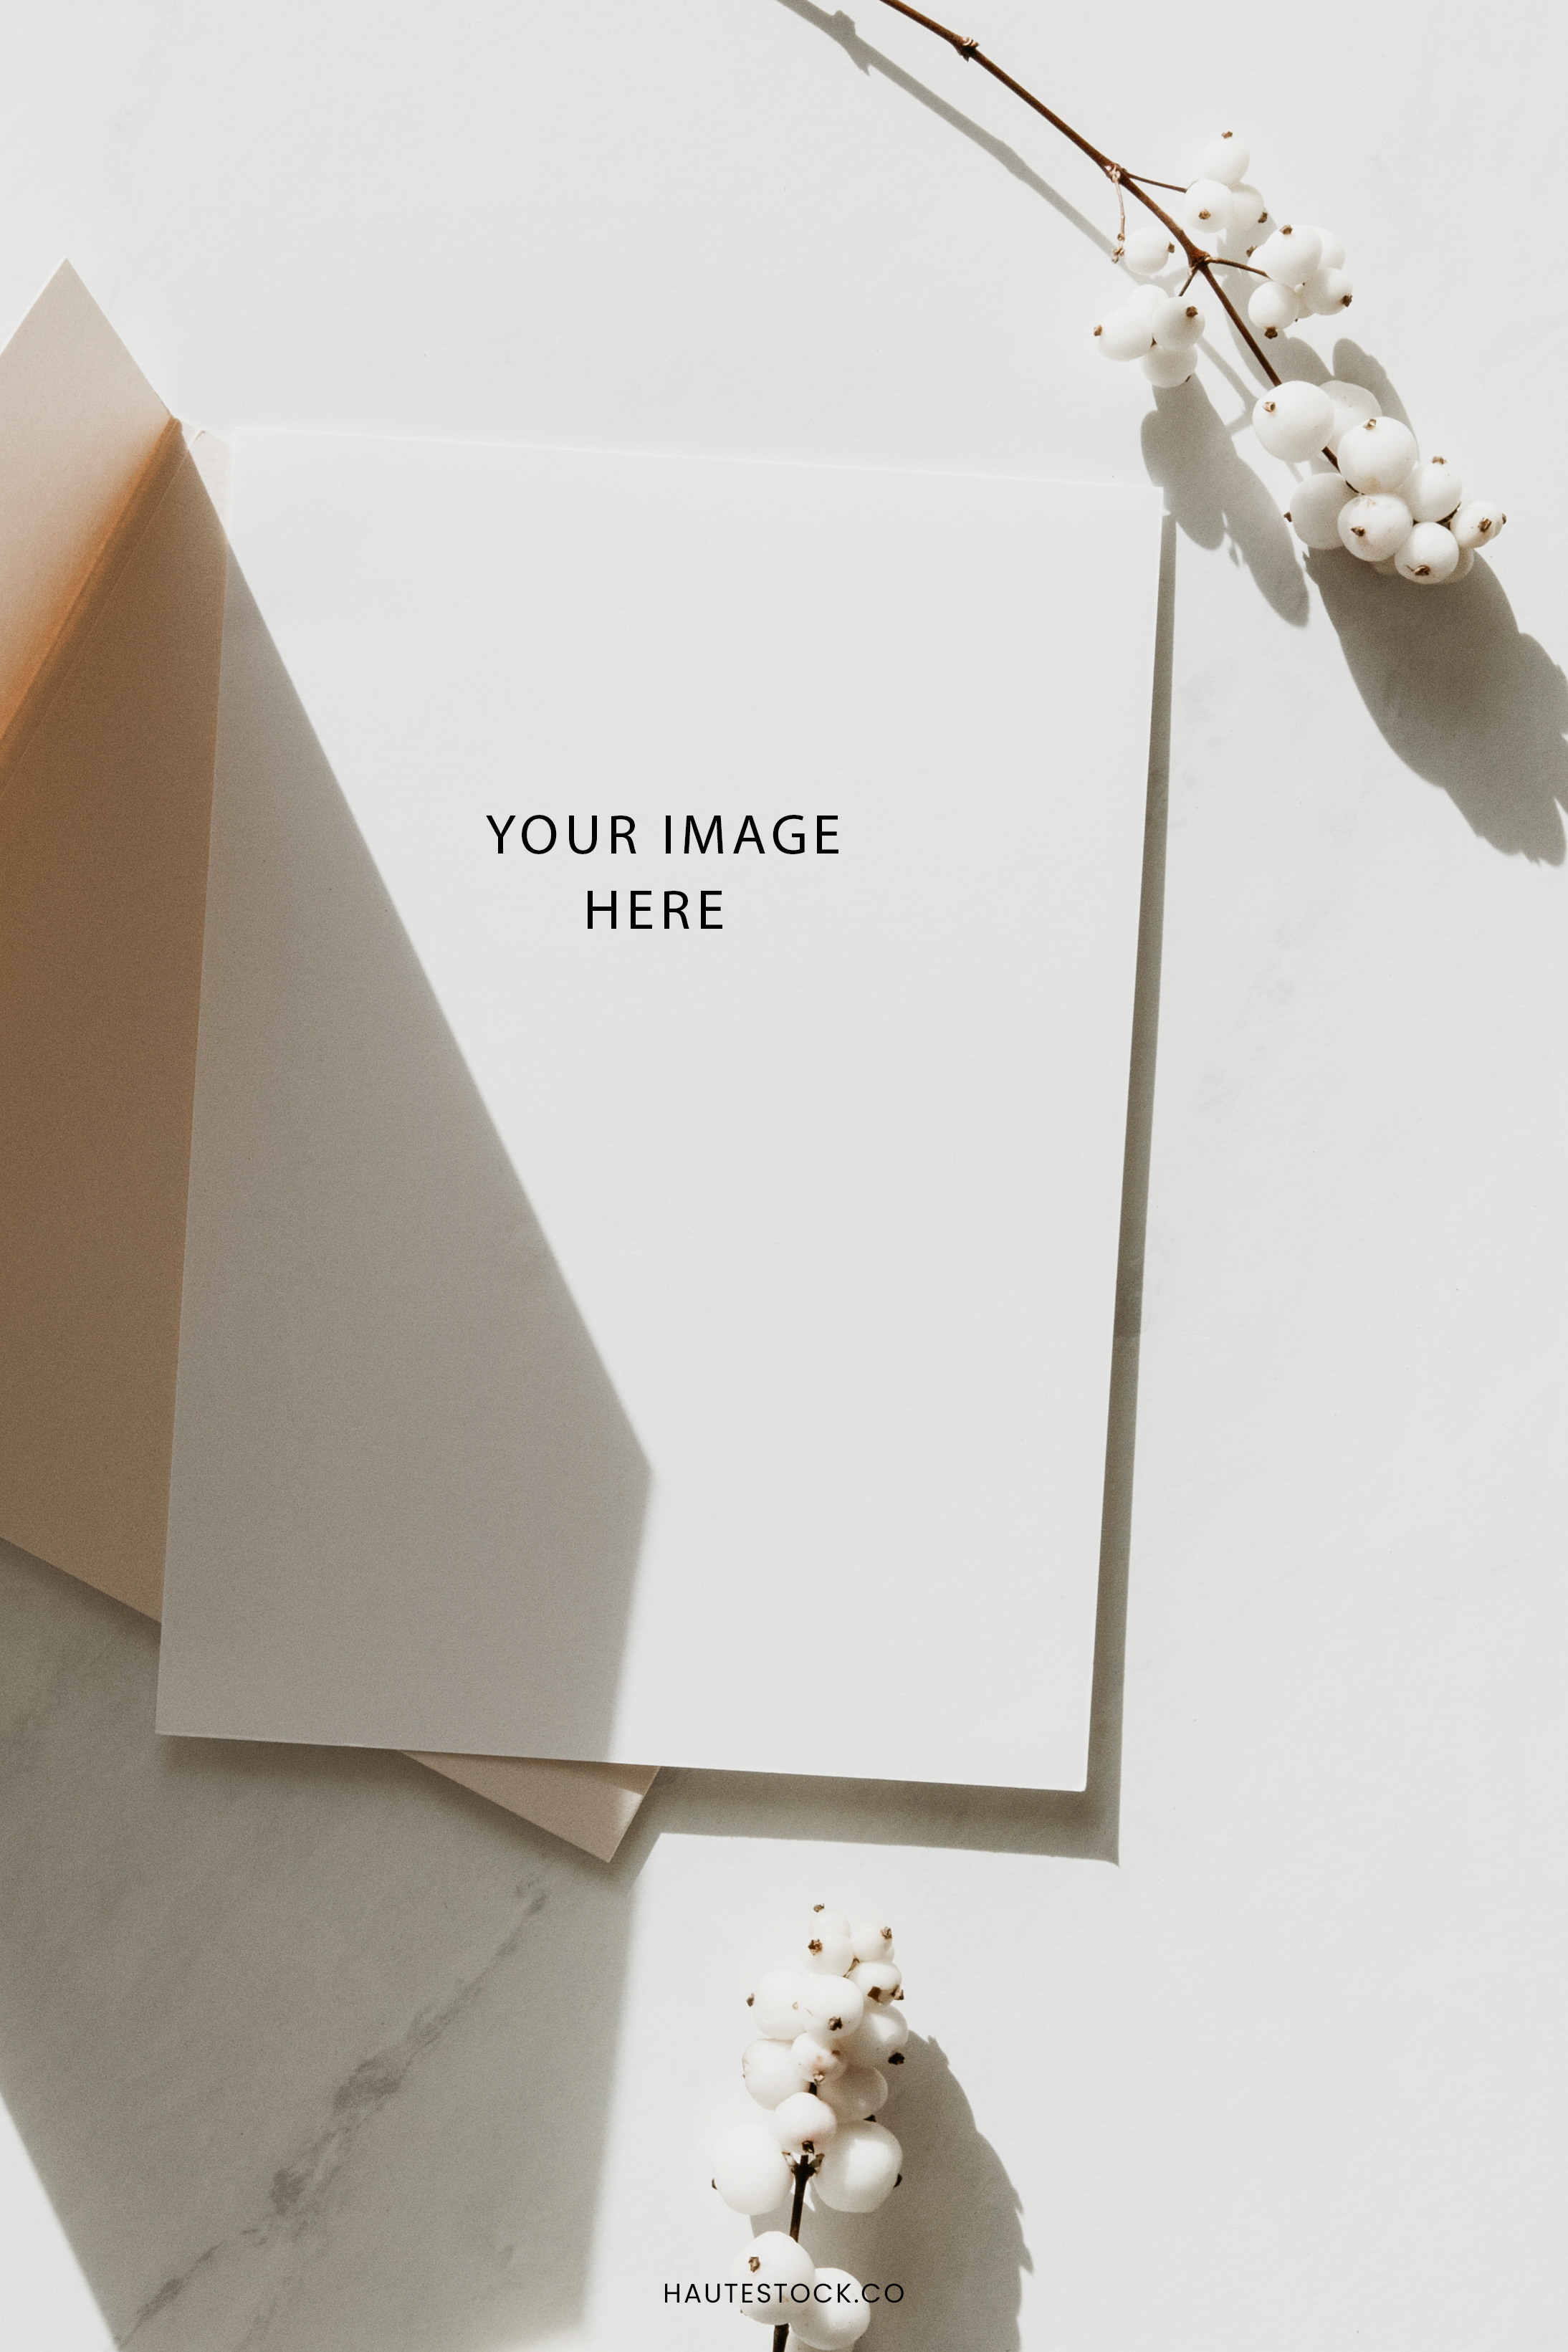 Learn how to use holiday styled stock photography to create graphics to create tech or stationery mockups for your business!